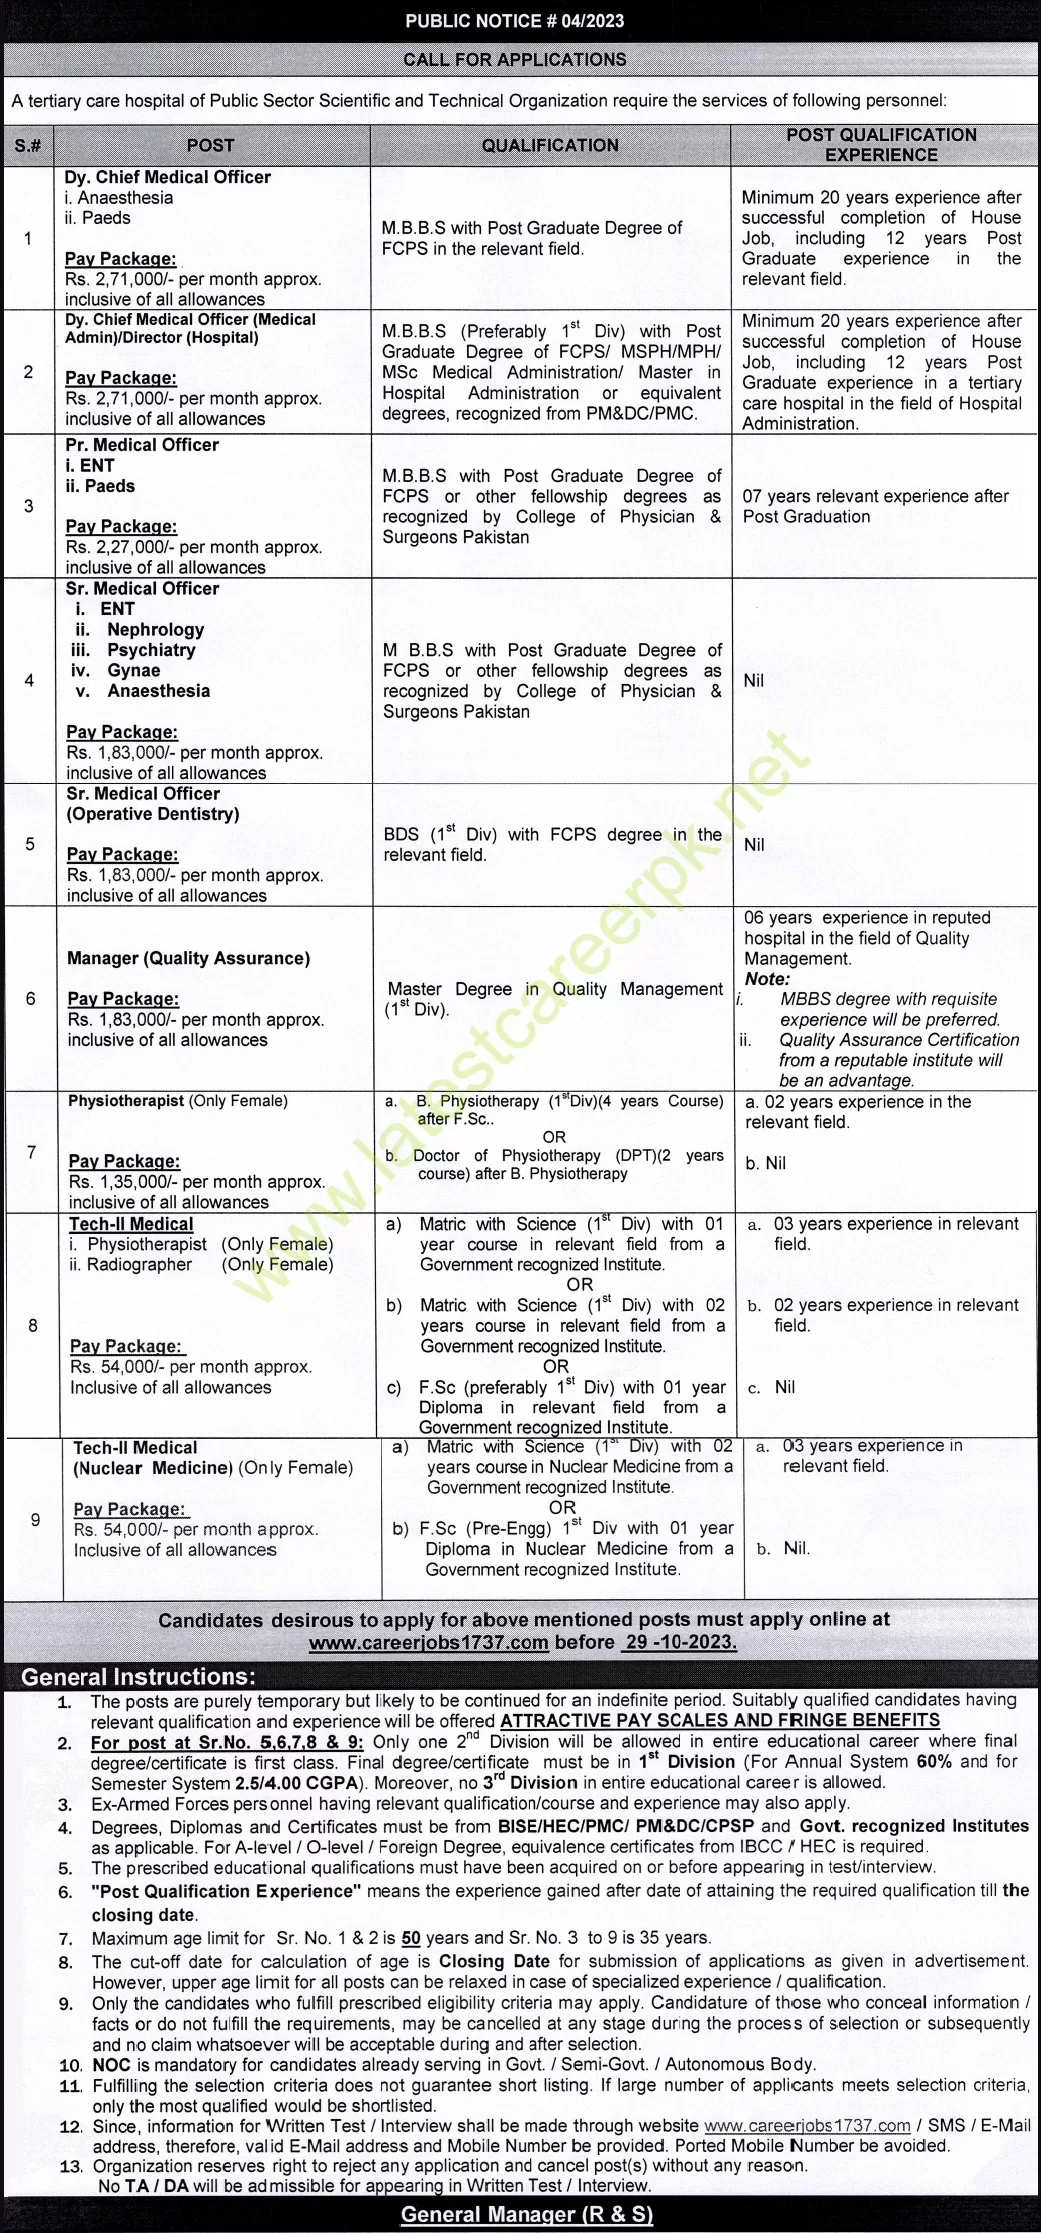 Public-Sector-Scientific-and-Technical-Organization-Islamabad-Jobs-15-Oct-2023